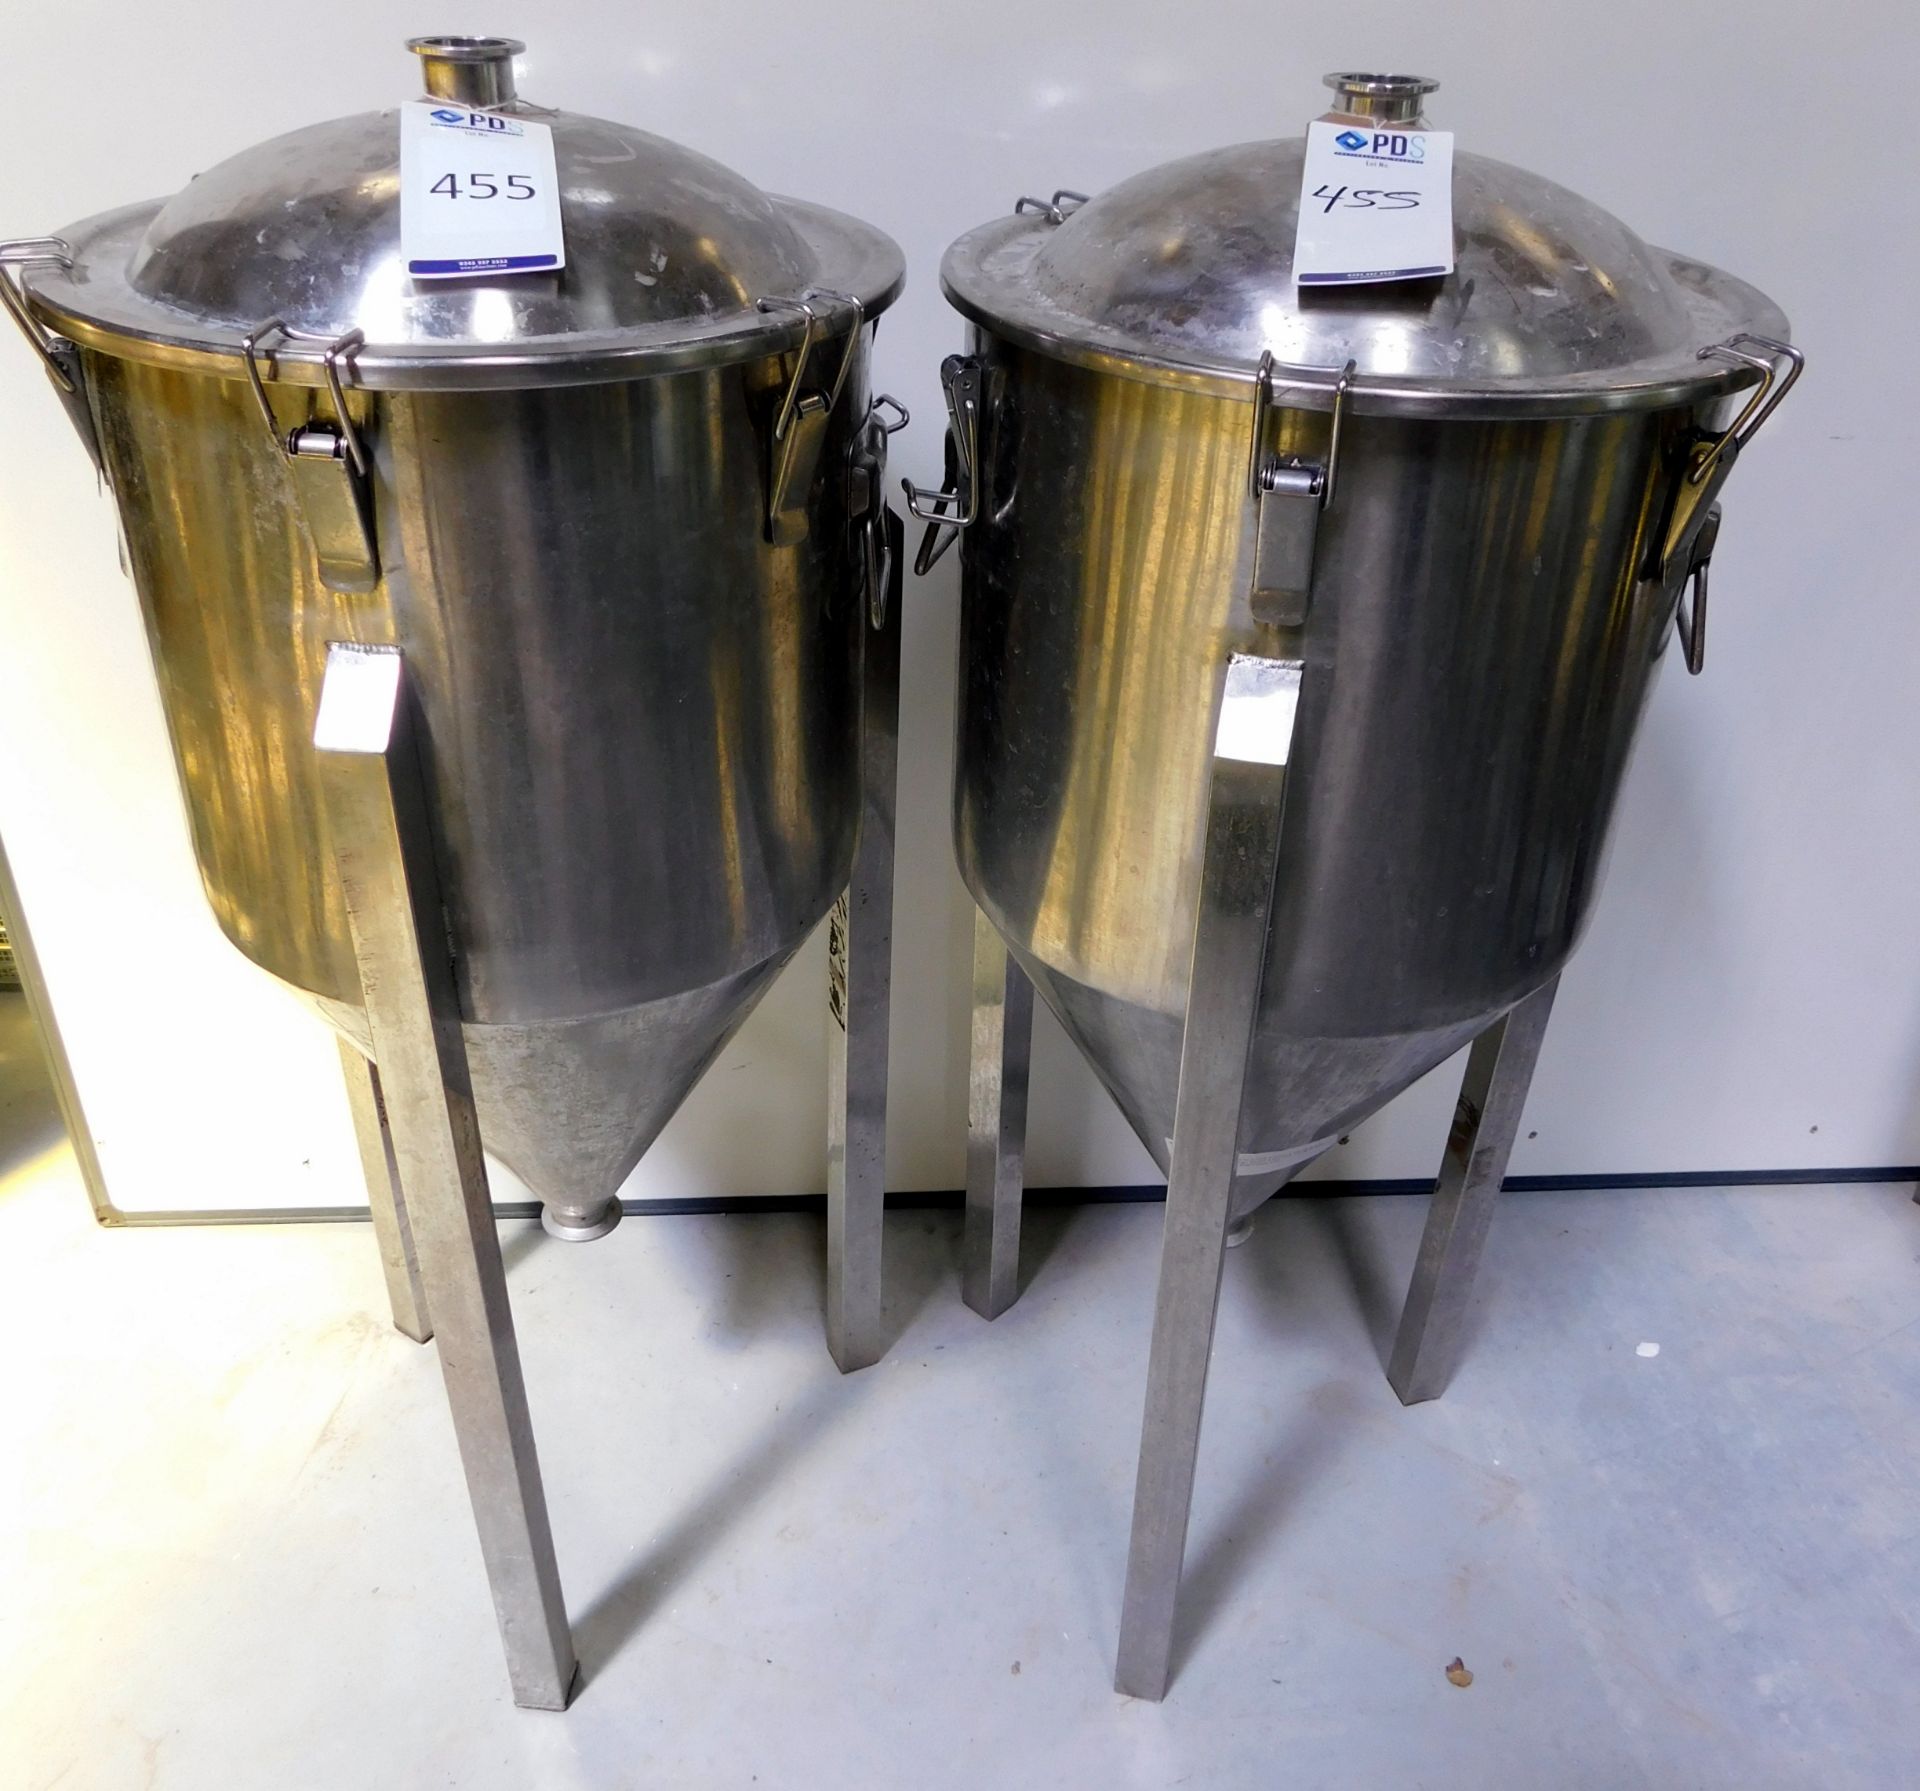 2 Brewing Technologies Stainless Steel 35L Fermenters (Located Brentwood, See General Notes for More